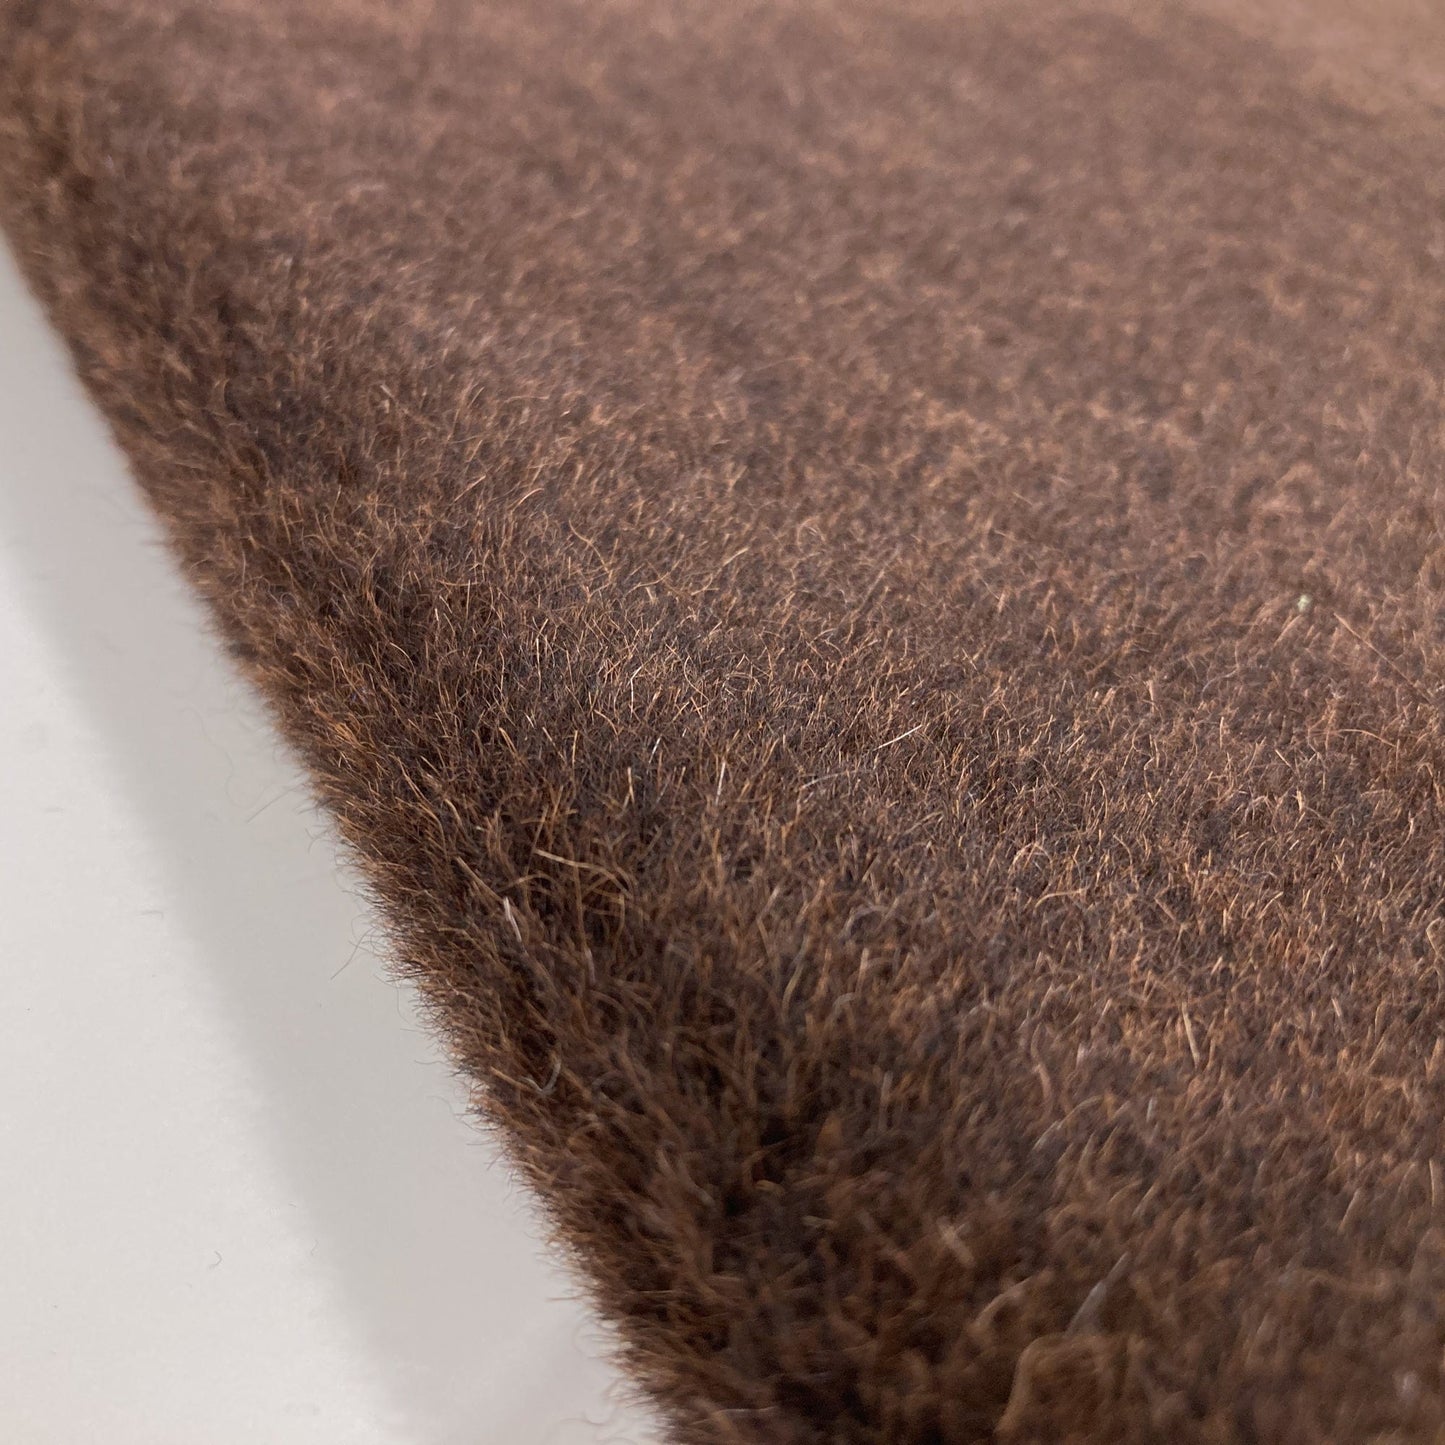 Soft Faux Fur Fabric In Chocolate Brown